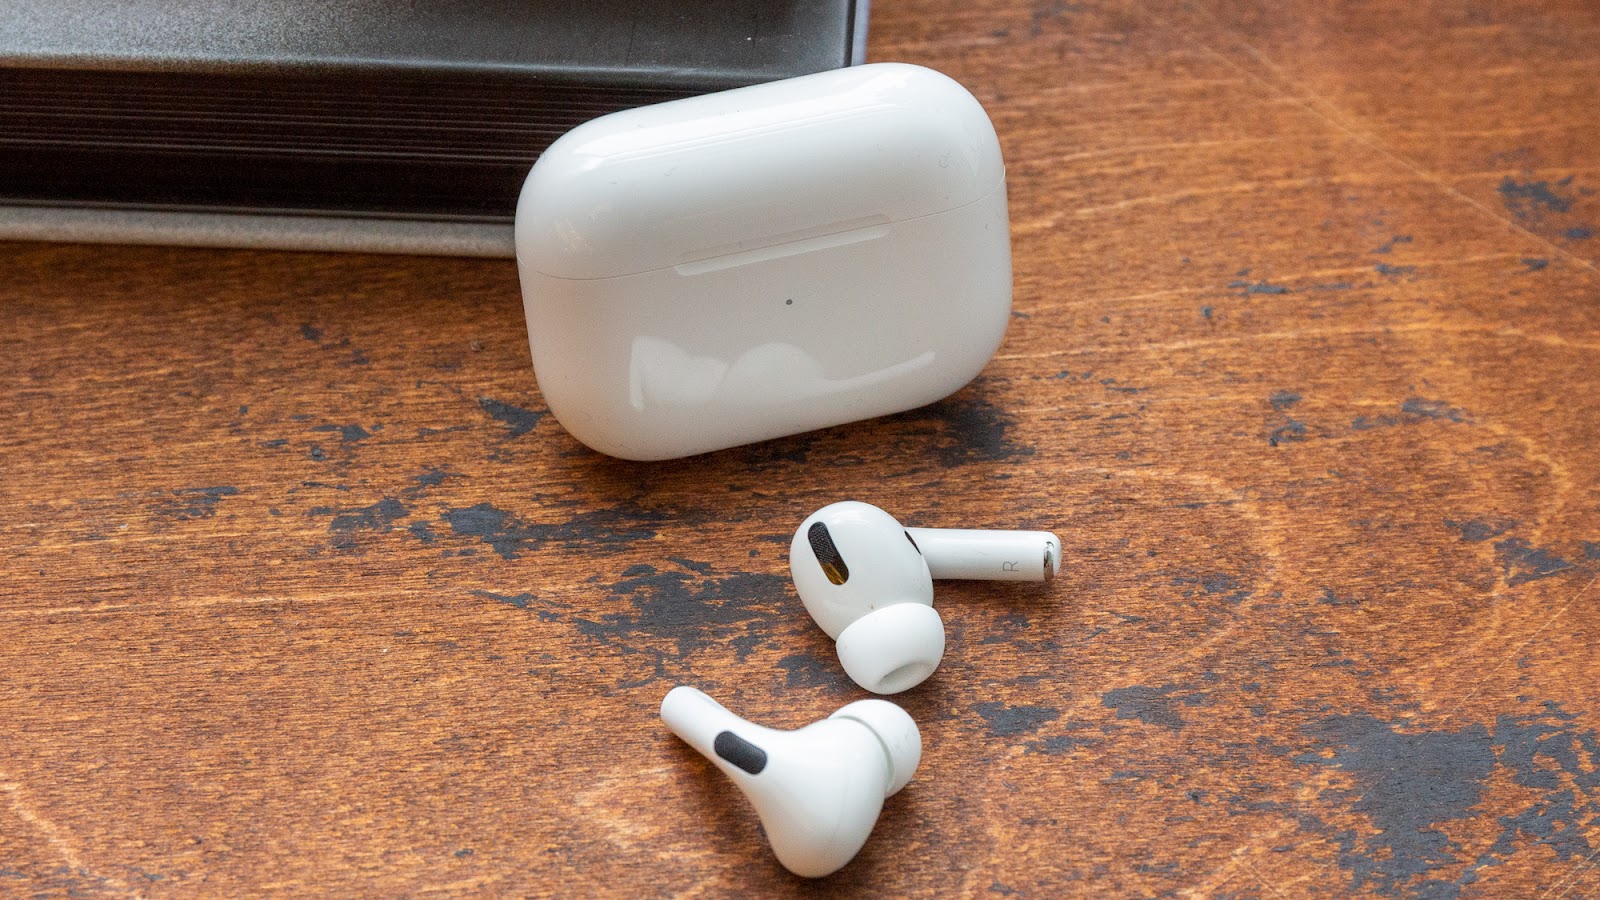 This image shows the AirPods Pro 2.